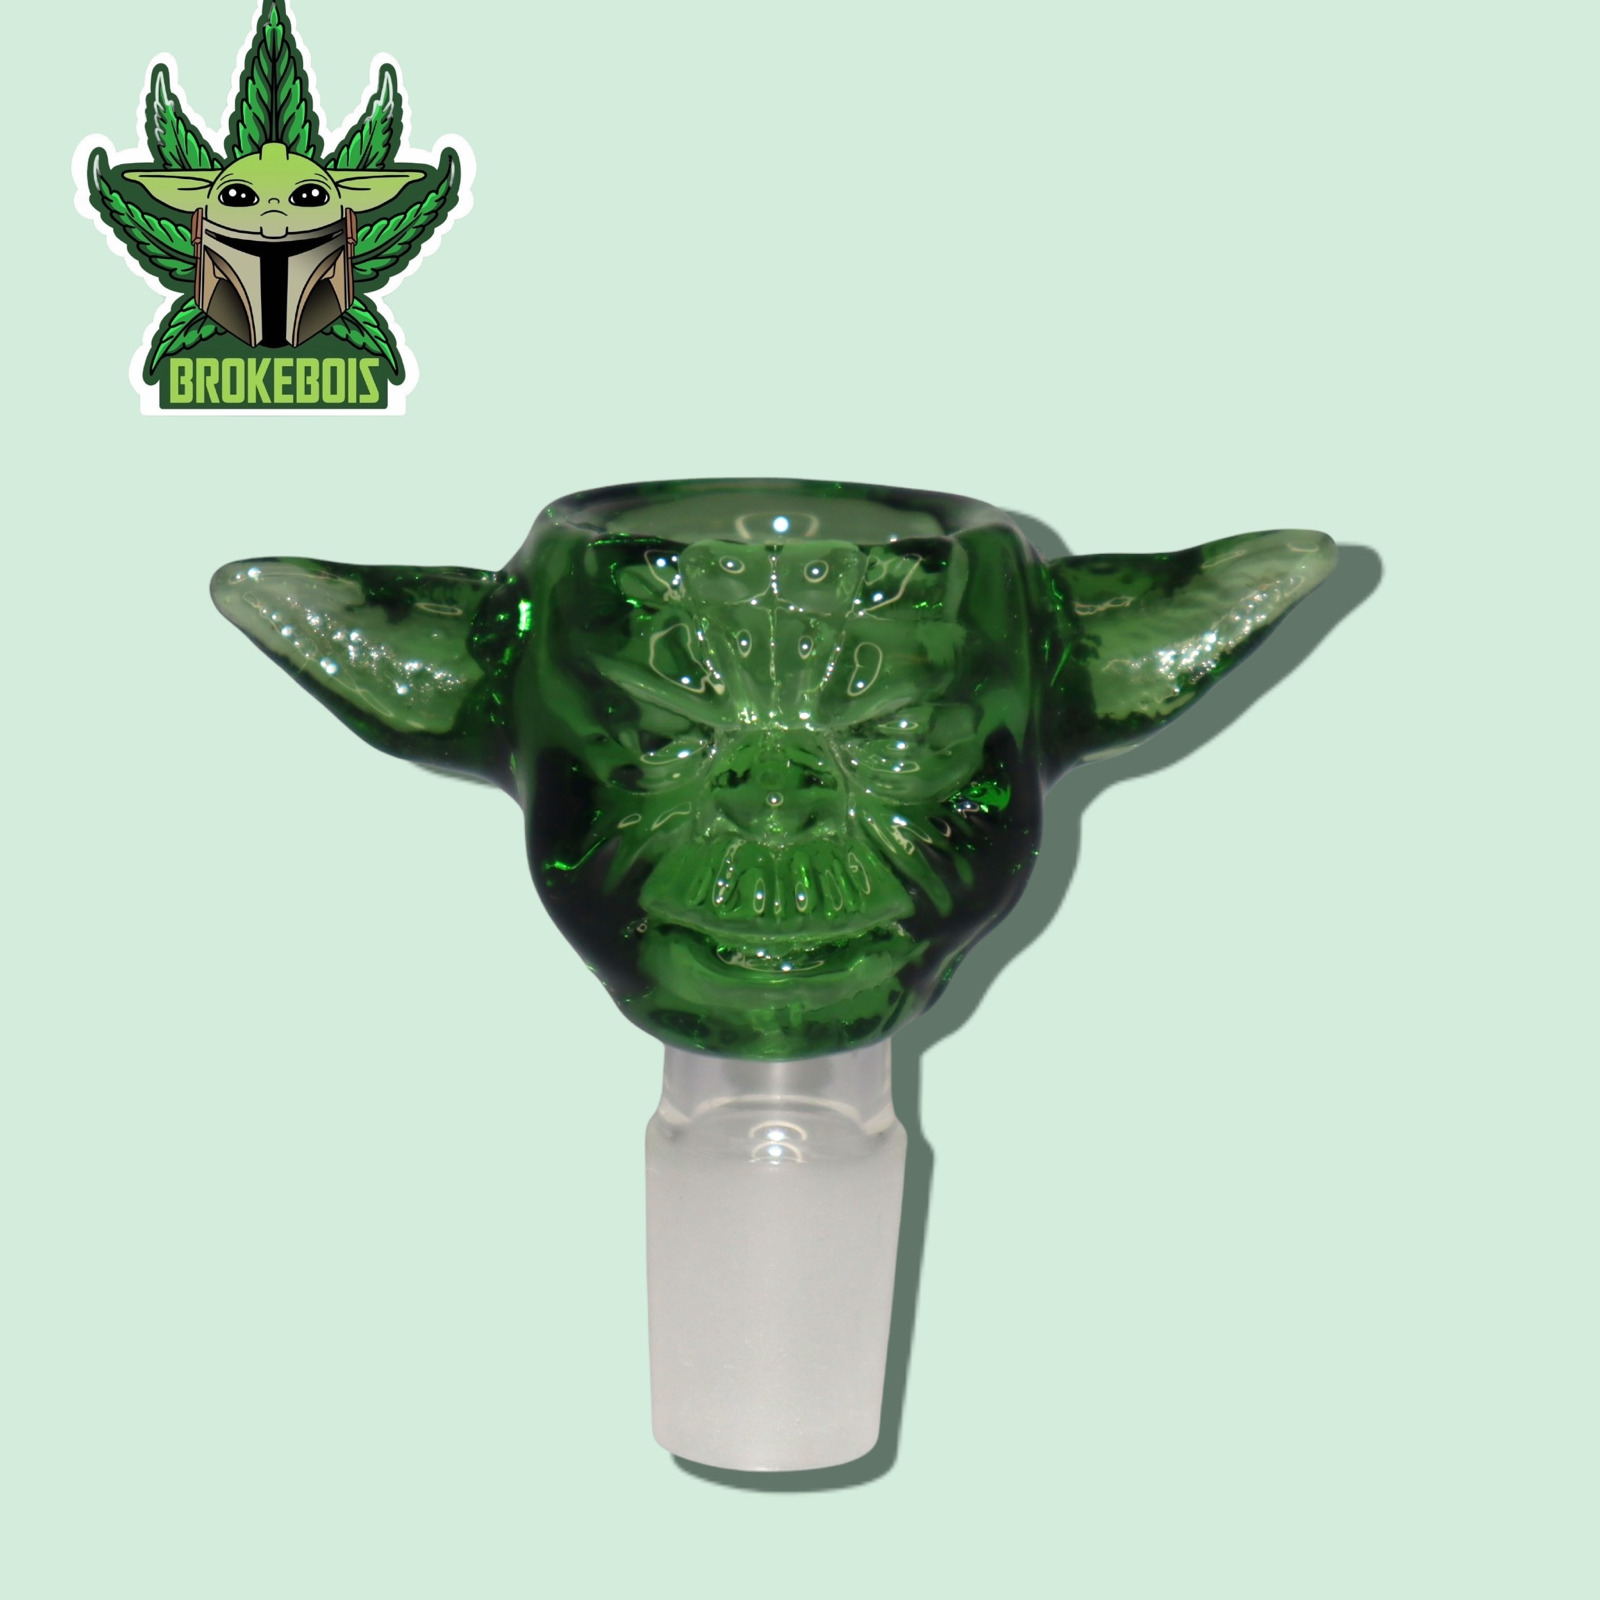 18MM Think Quality Glass Yoda Replacement Bowl Head Piece - Tobacco Bong Bowl